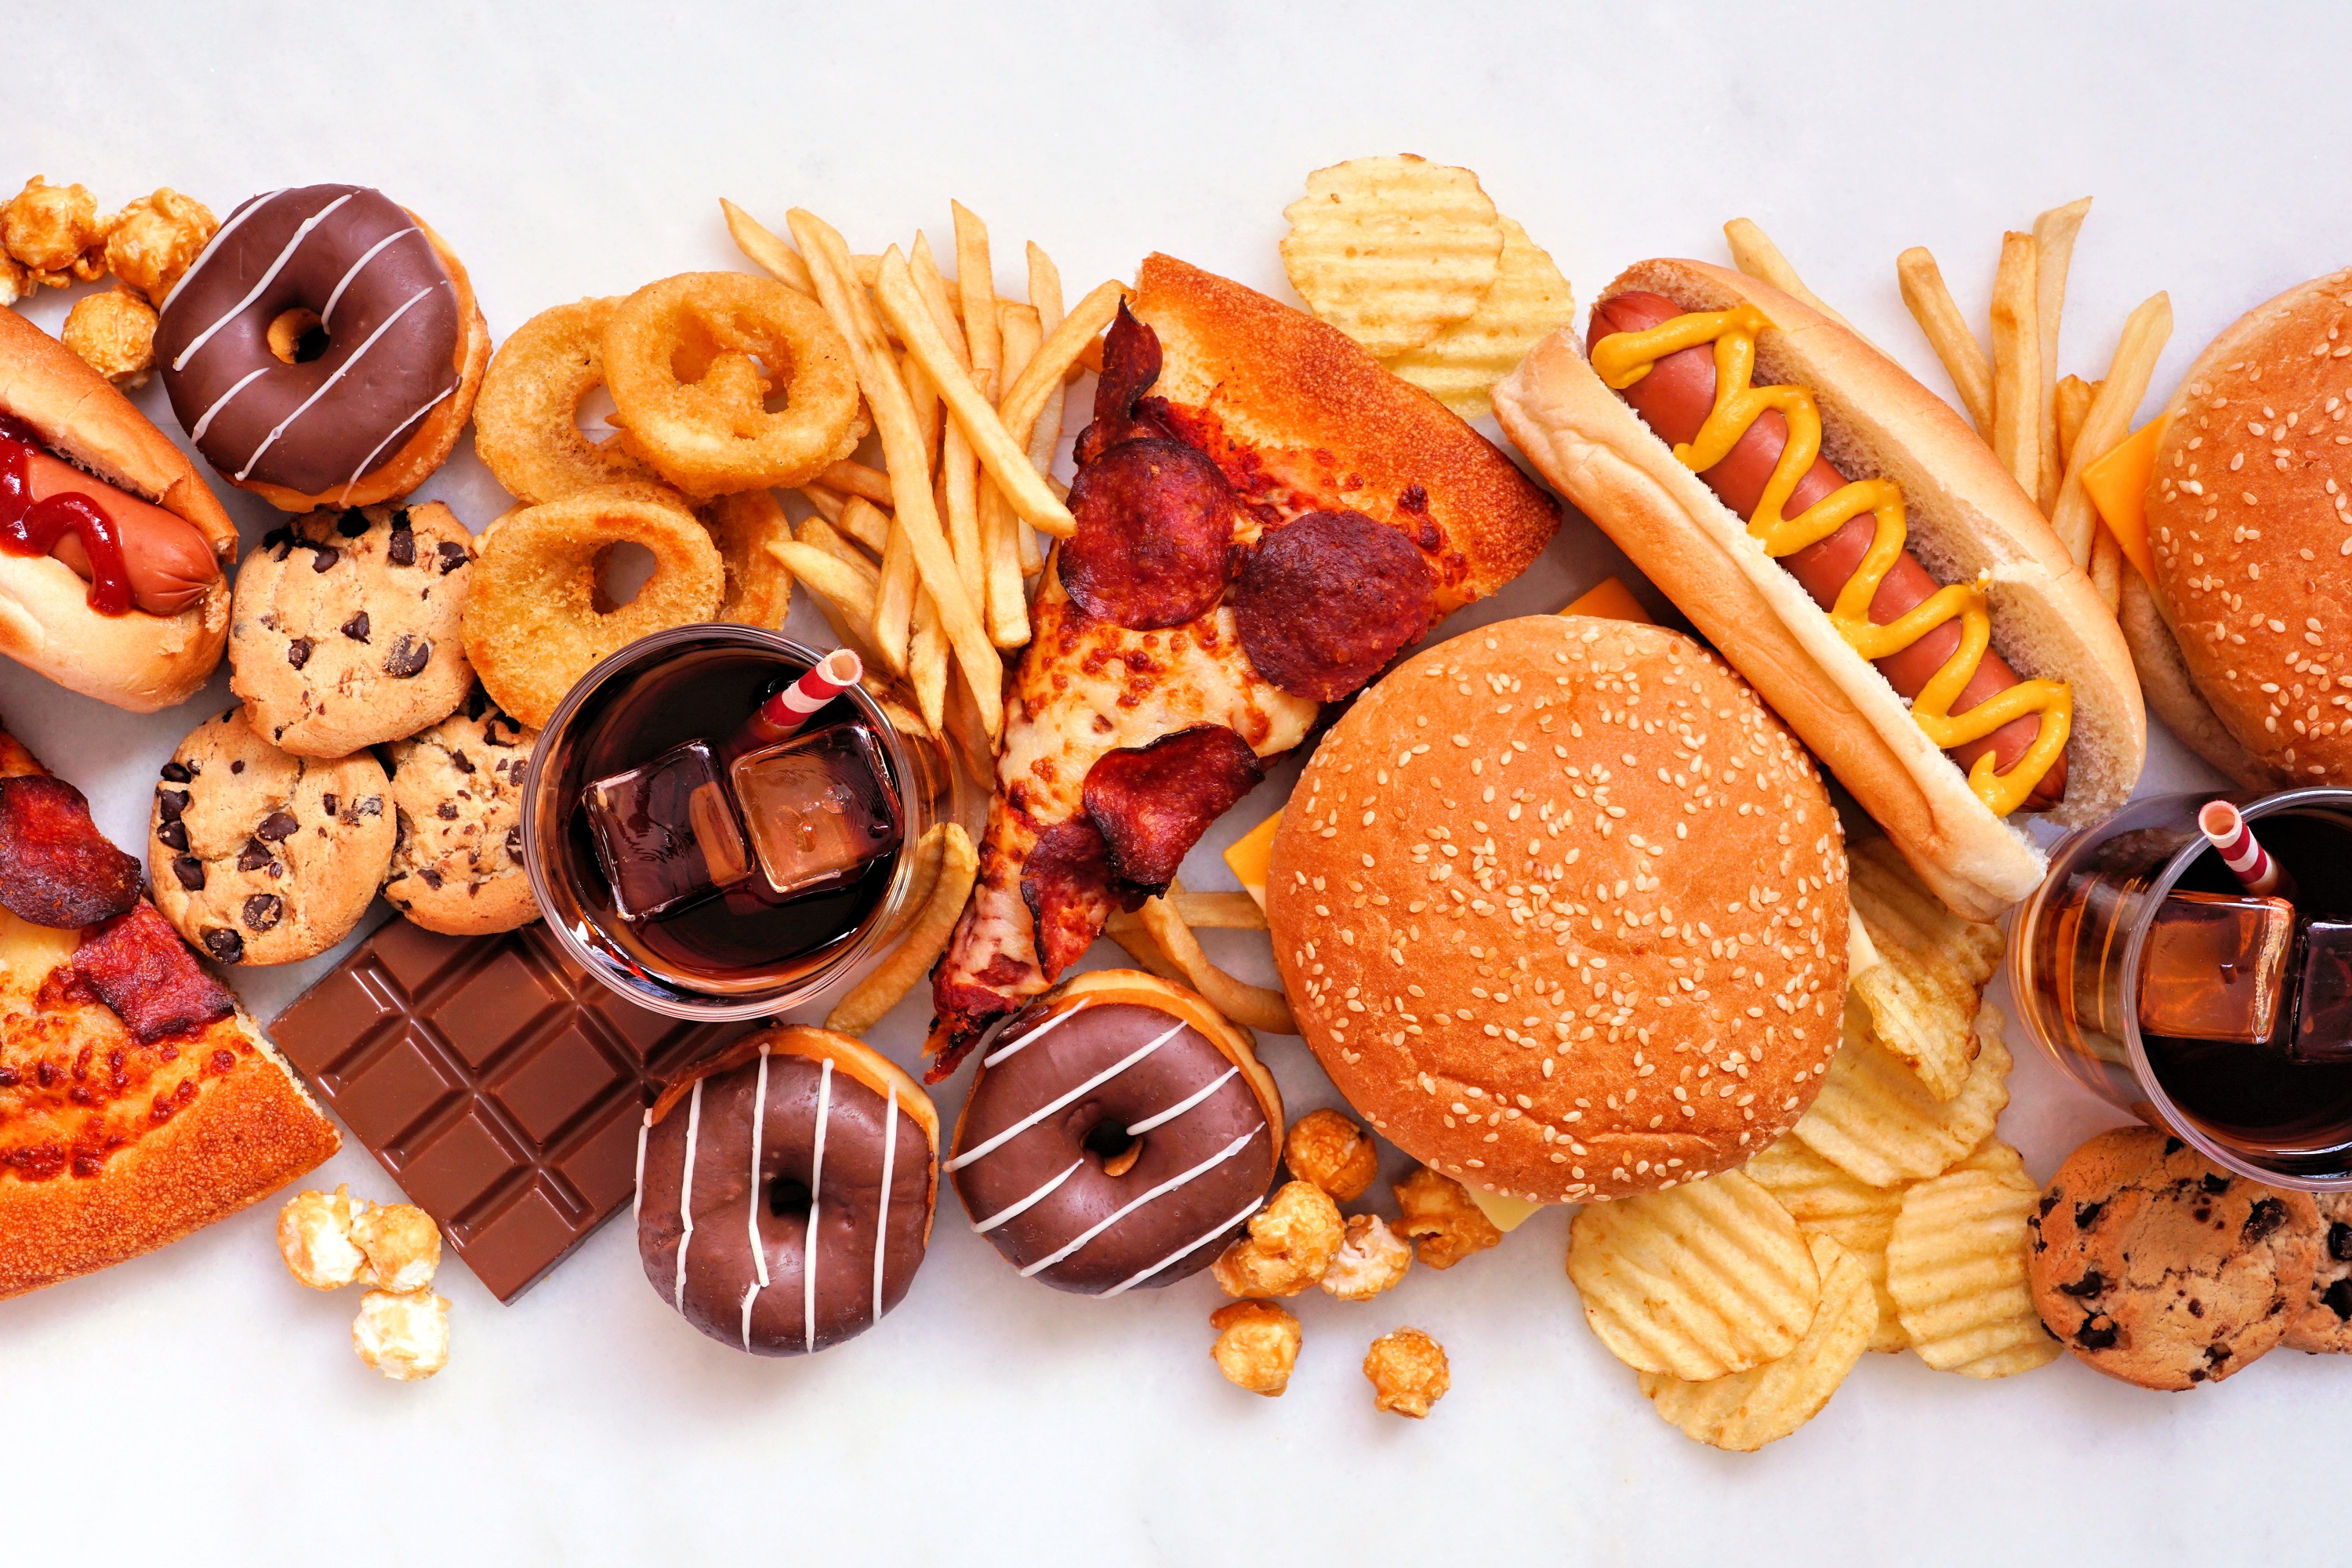 Scratching the surface: ultra-processed foods